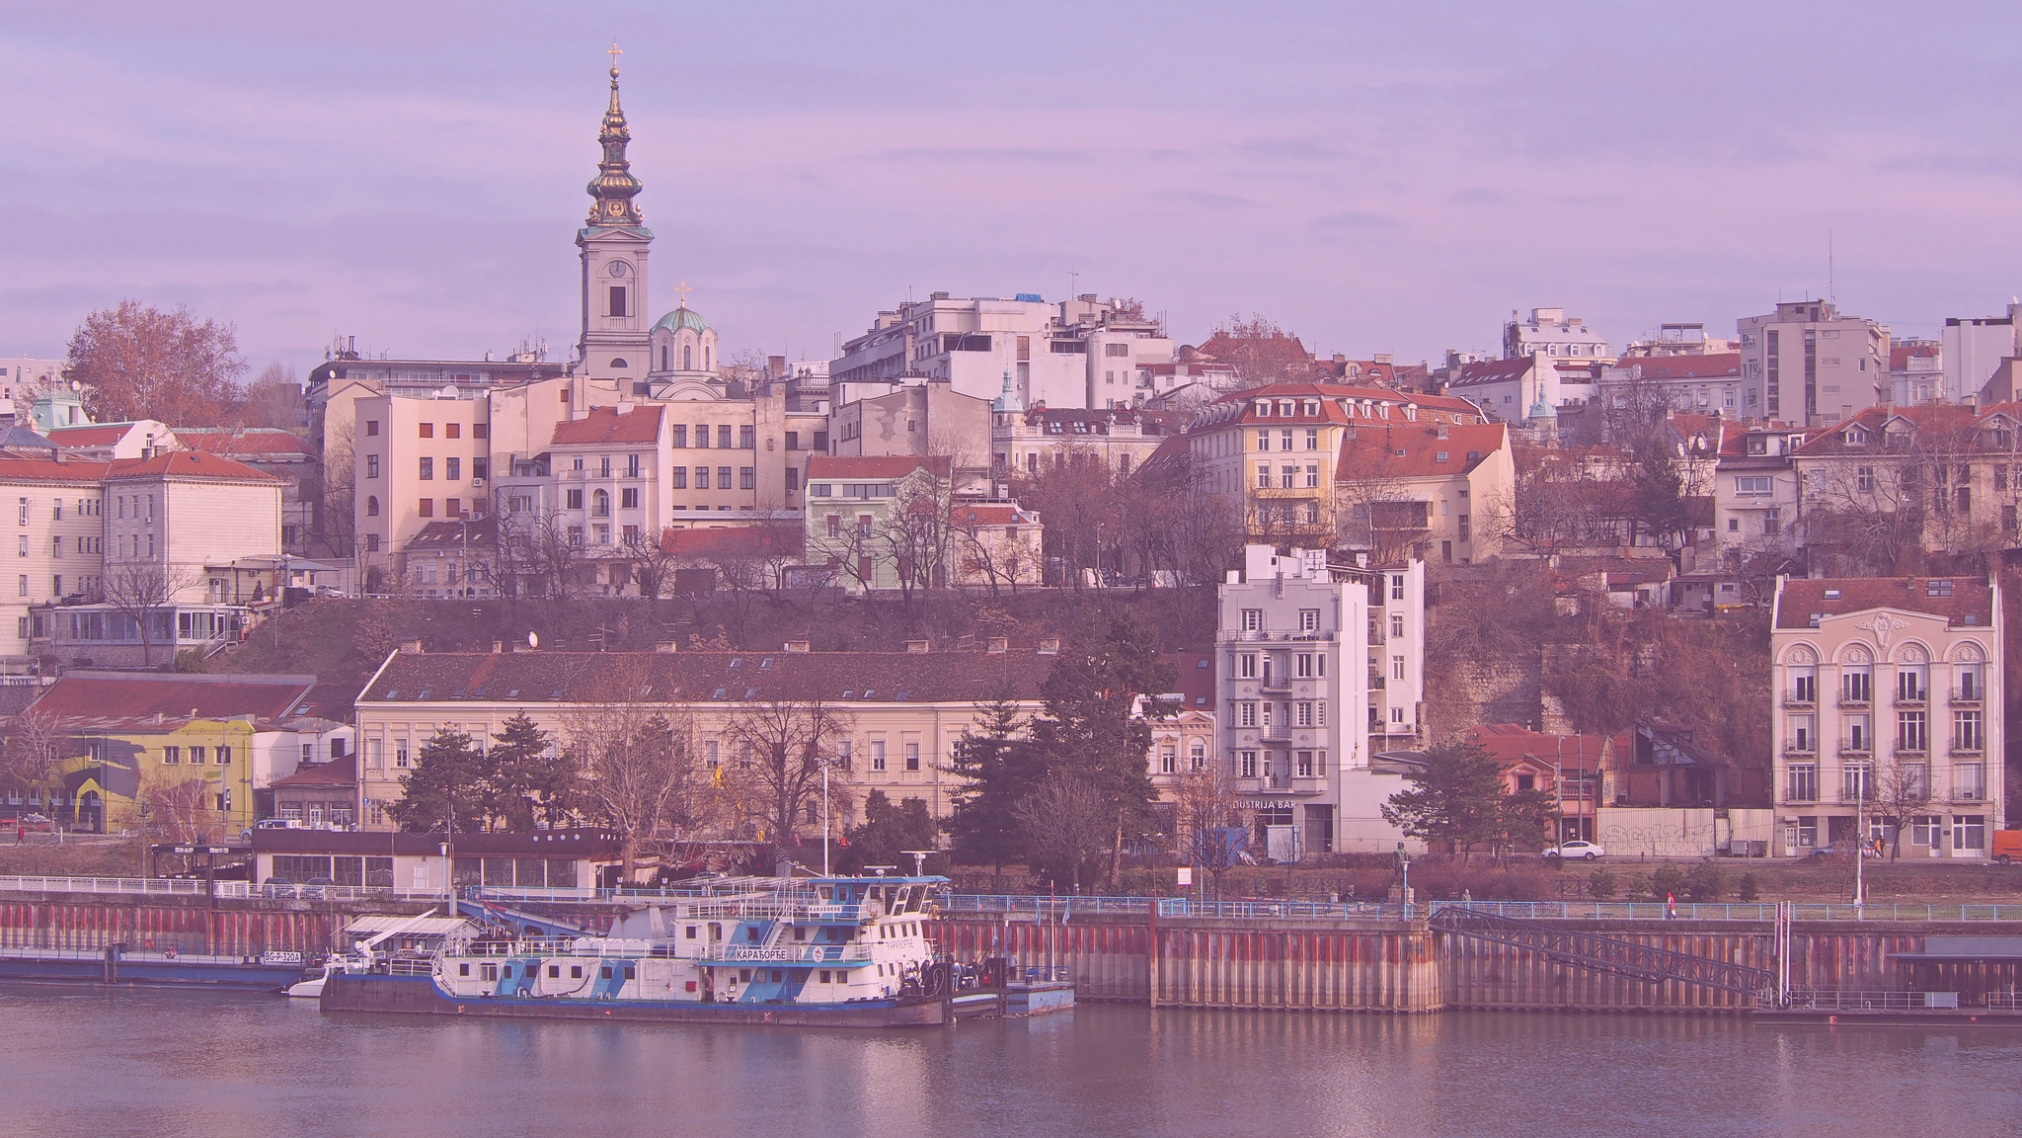 Photo: "Belgrade waterfront", by Akos Hajdu licensed under CC BY 2.0. Hue modified from the original